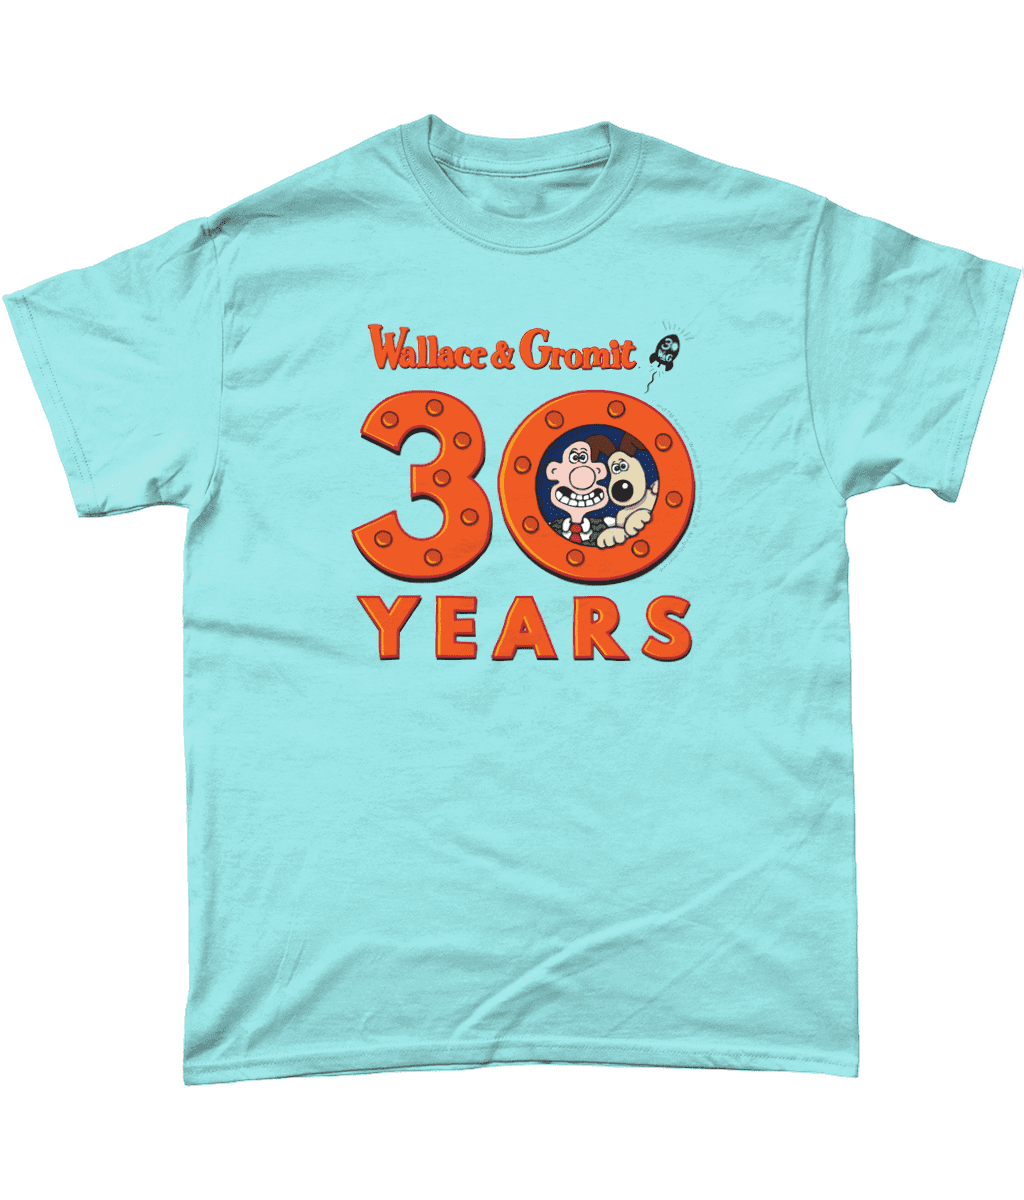 Wallace and Gromit 30 Years Rocket Men's T-Shirt Light Blue